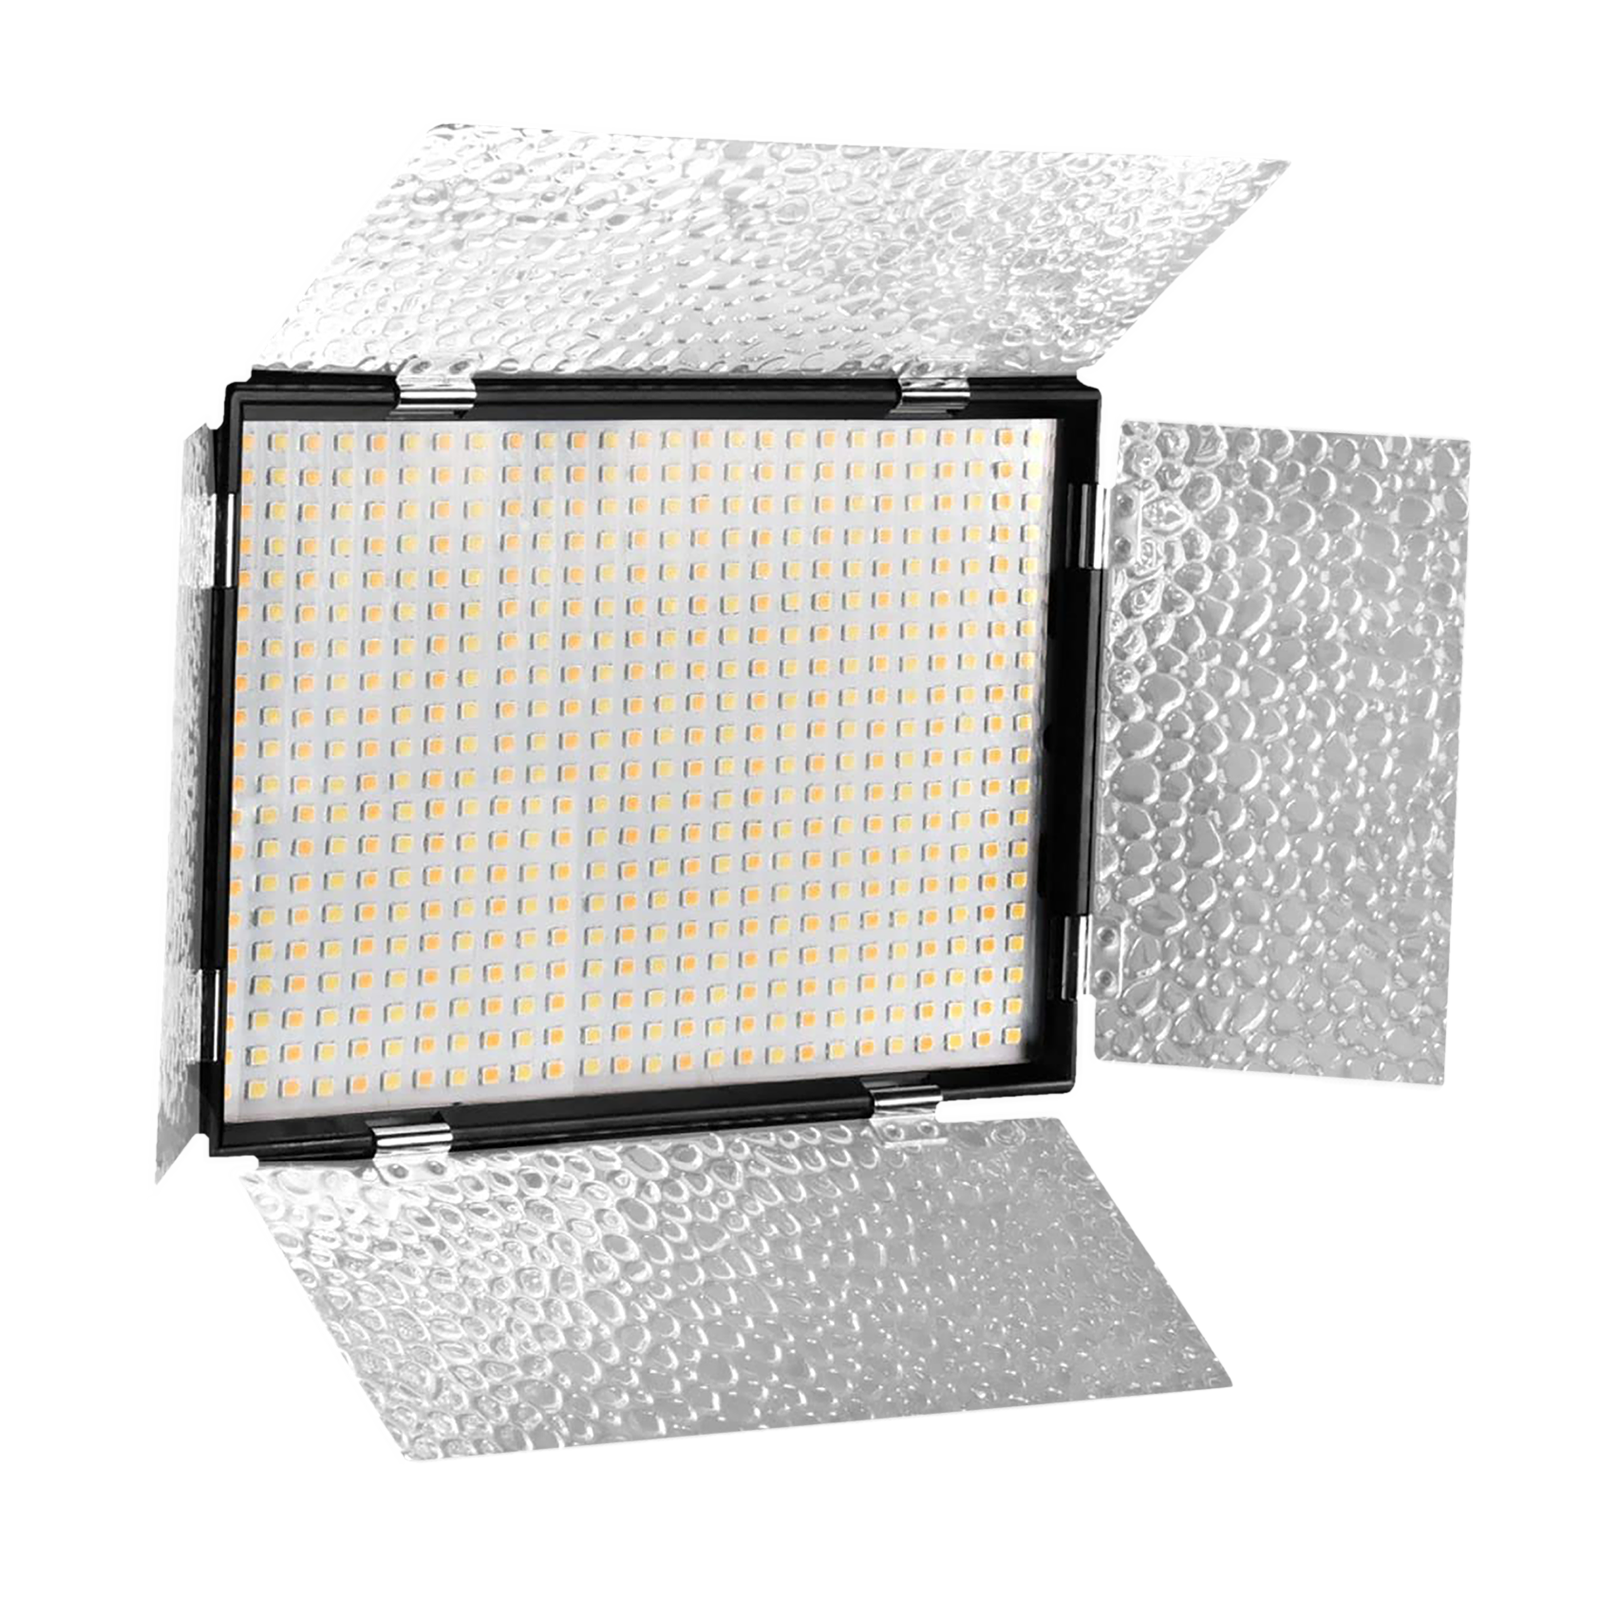 Digitek D520B LED Video Light with 4 Detachable Barndoor for Still Photography & Videography (Dual Color Temperature)